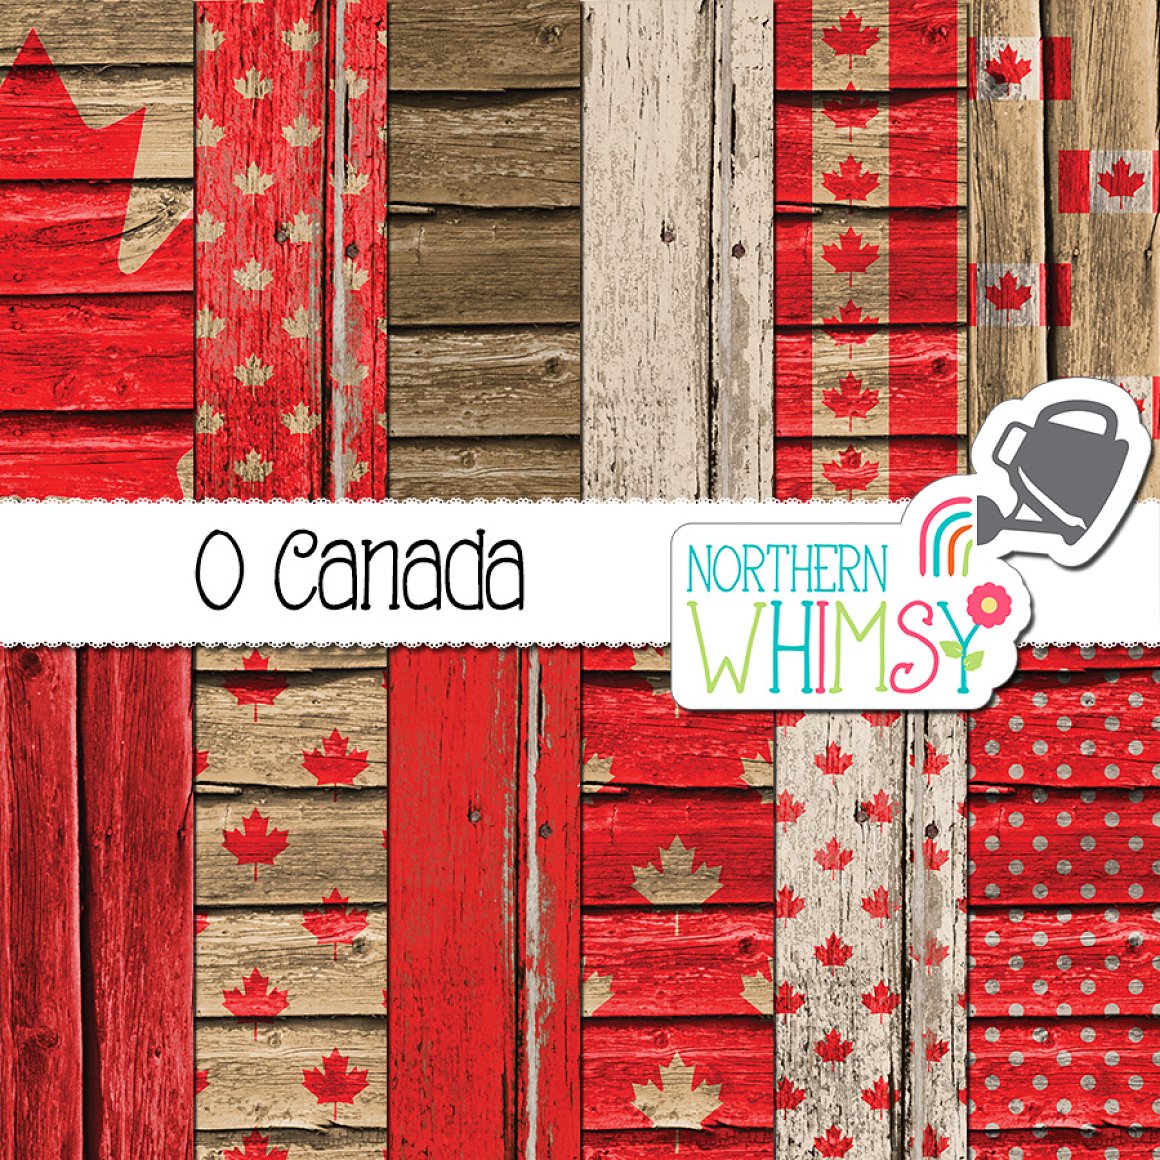 Images of northernwhimsy canada wood.